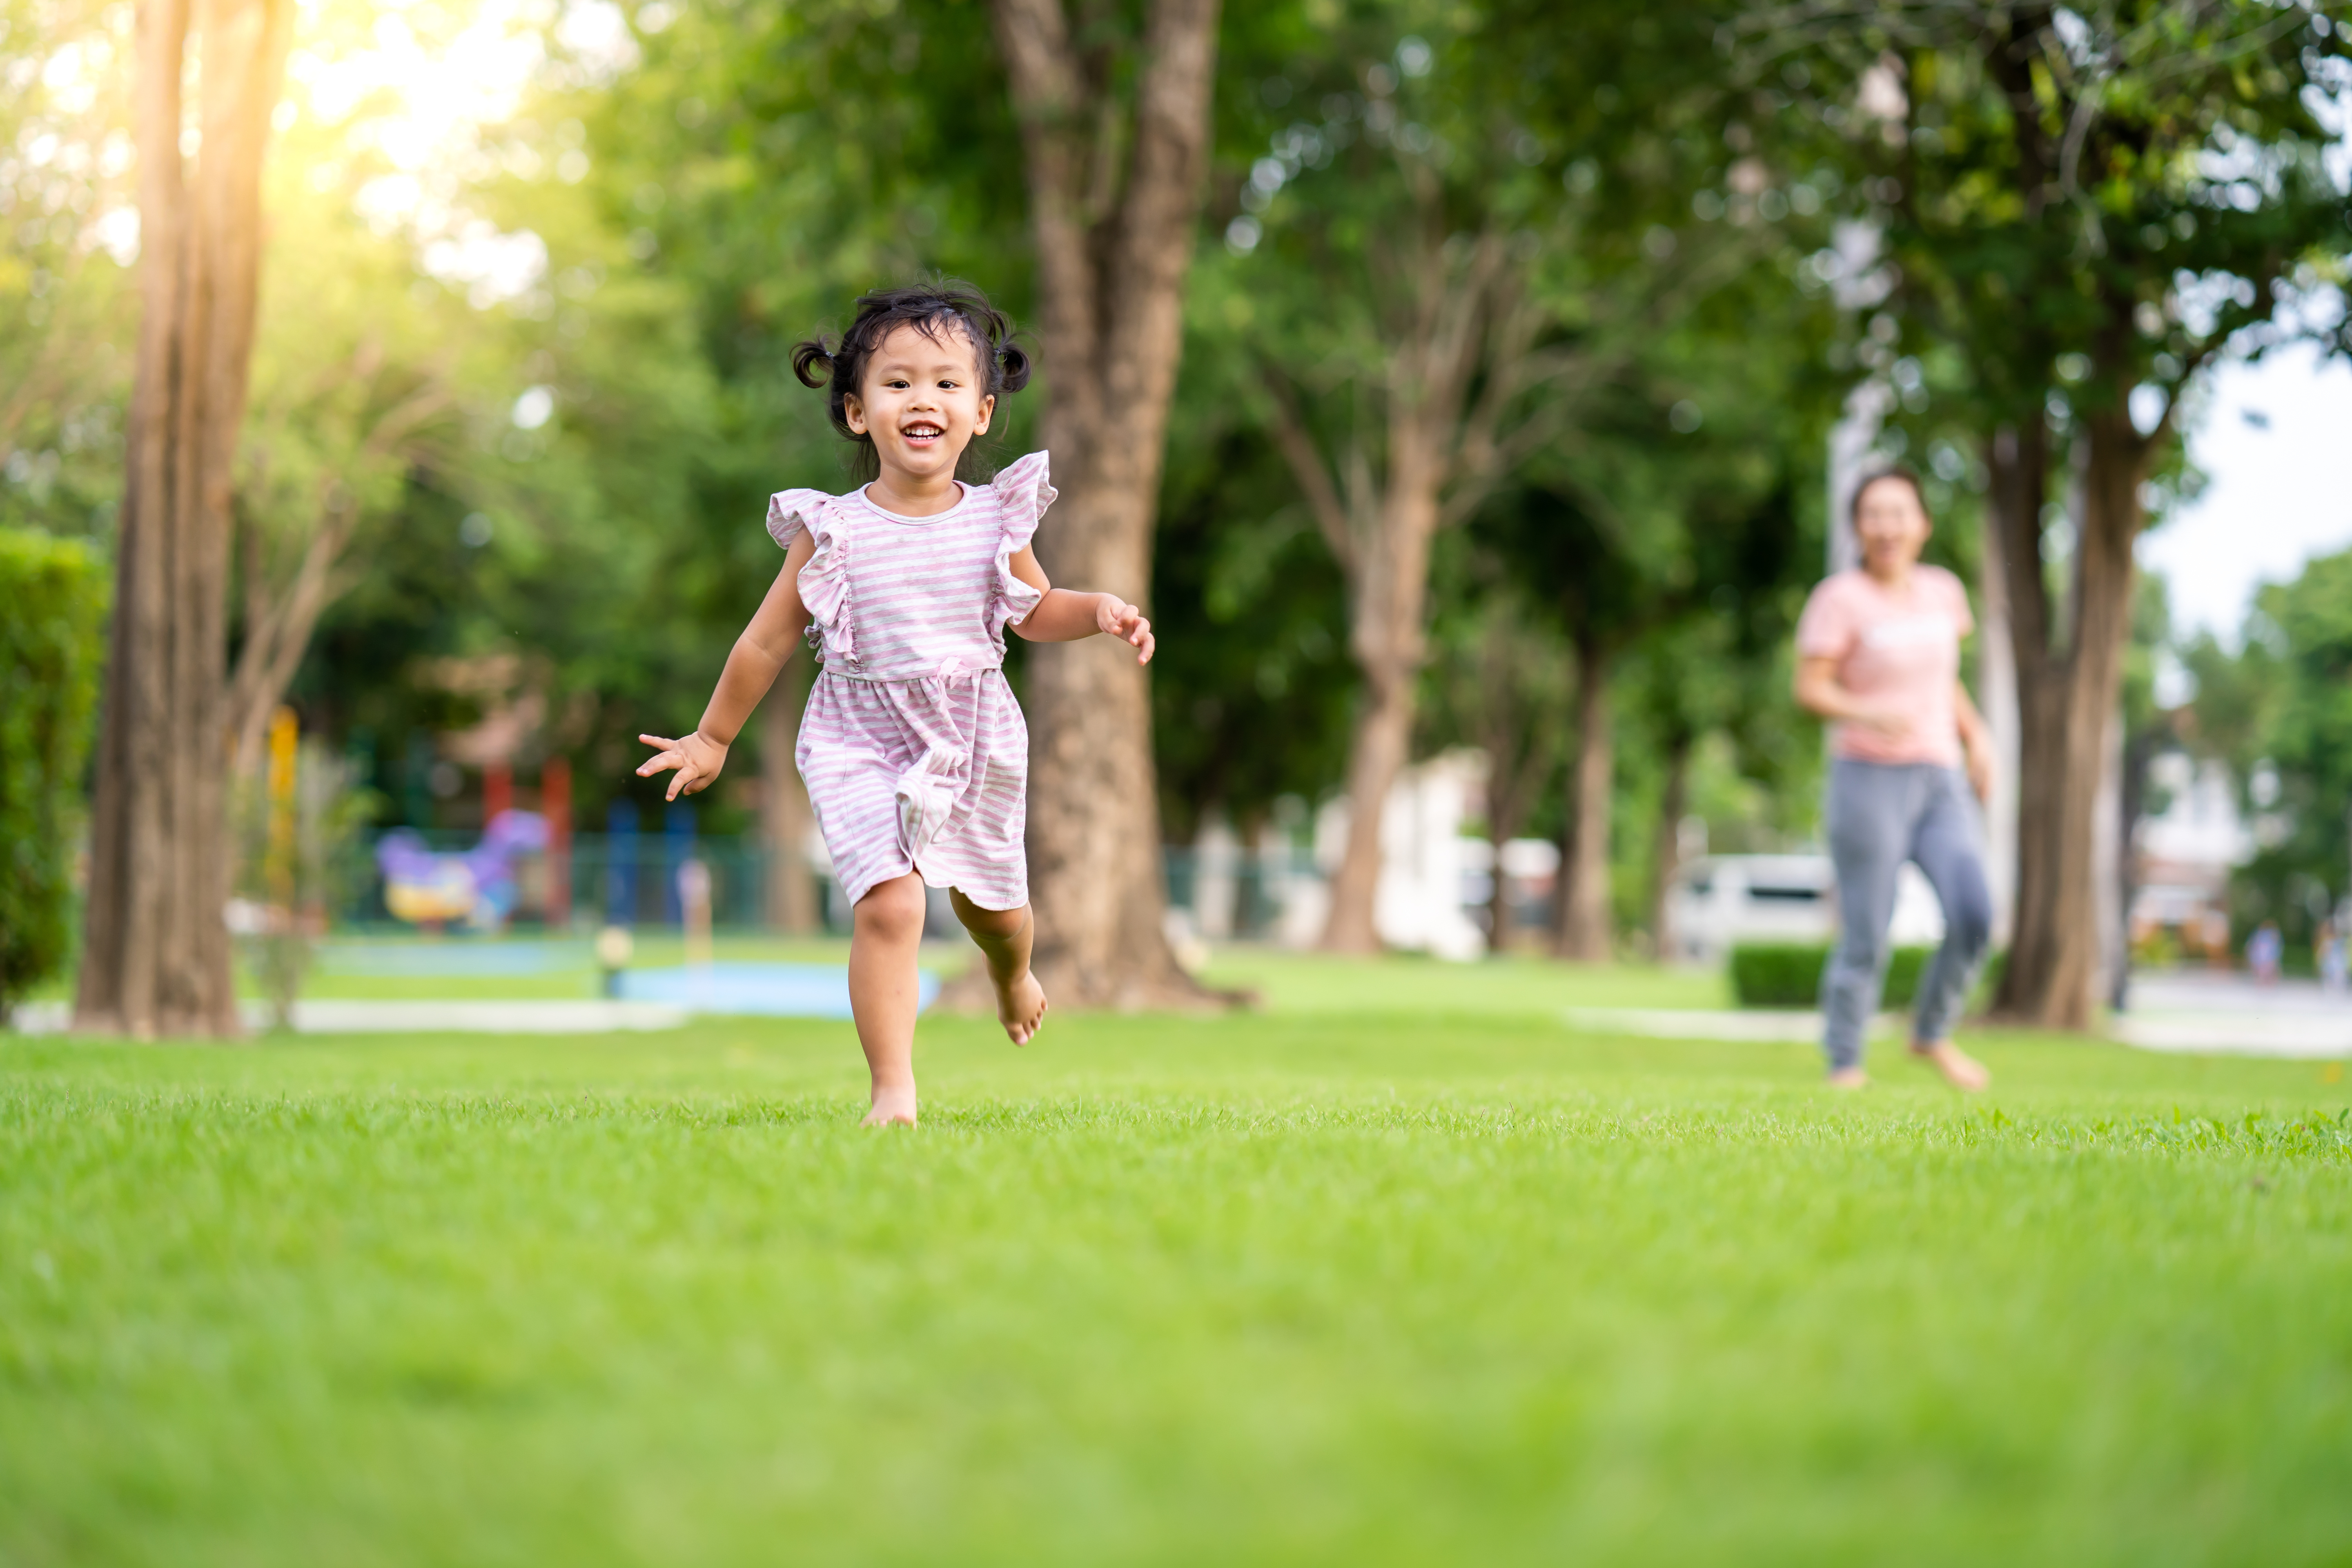 a child runs across a lawn at the park in a pink dress